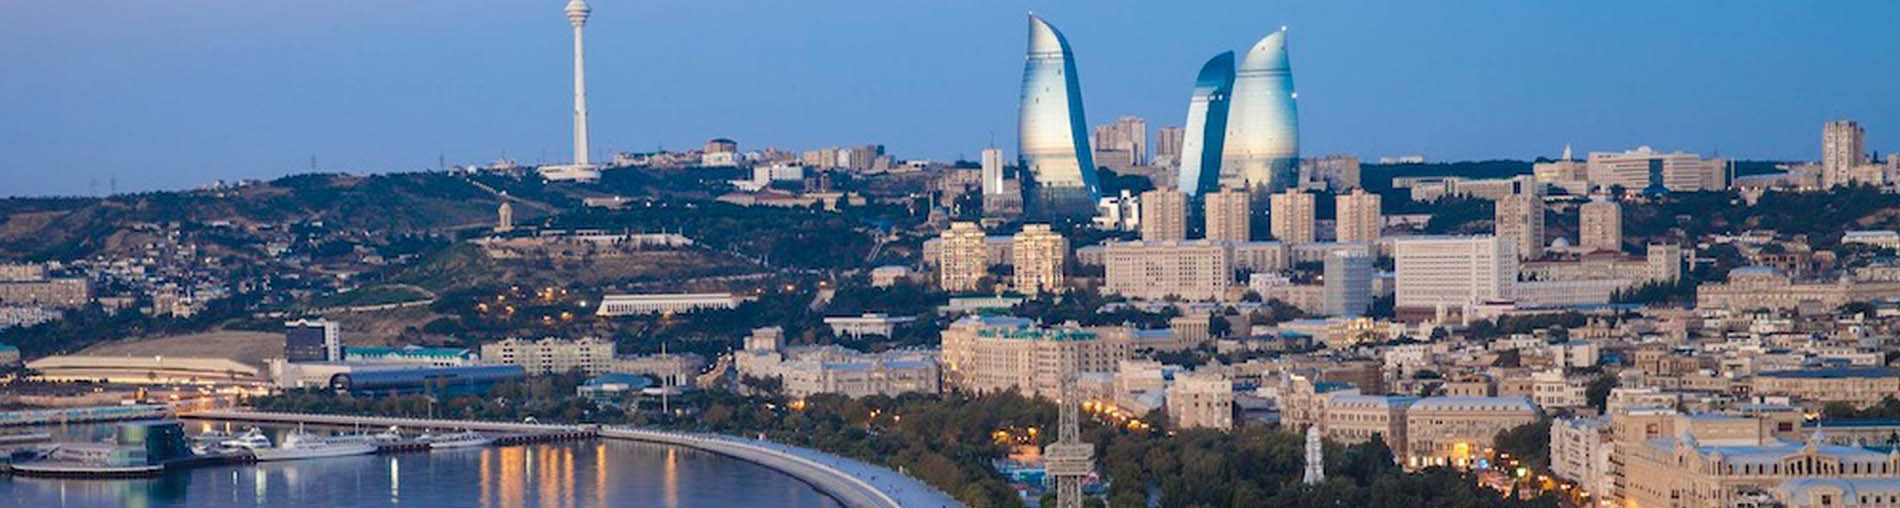 Most Popular Azerbaijan Tour Packages